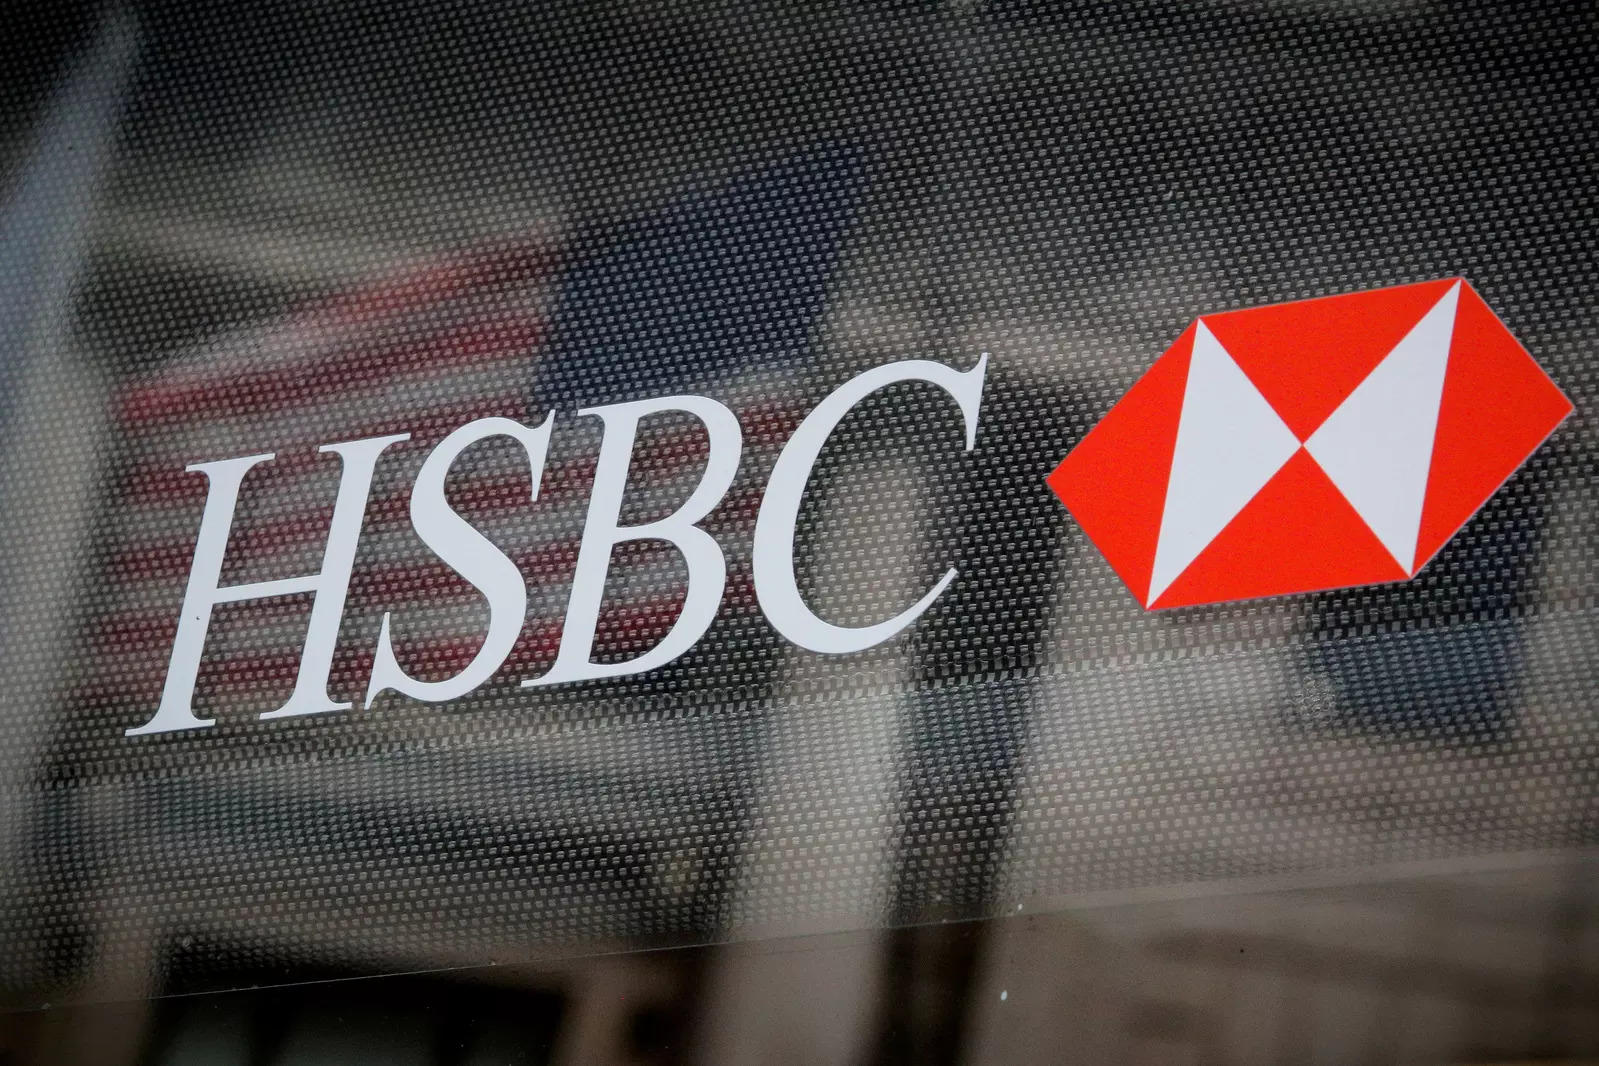 HSBC commits Rs 125 cr to green causes, energy transition projects in India over next five years